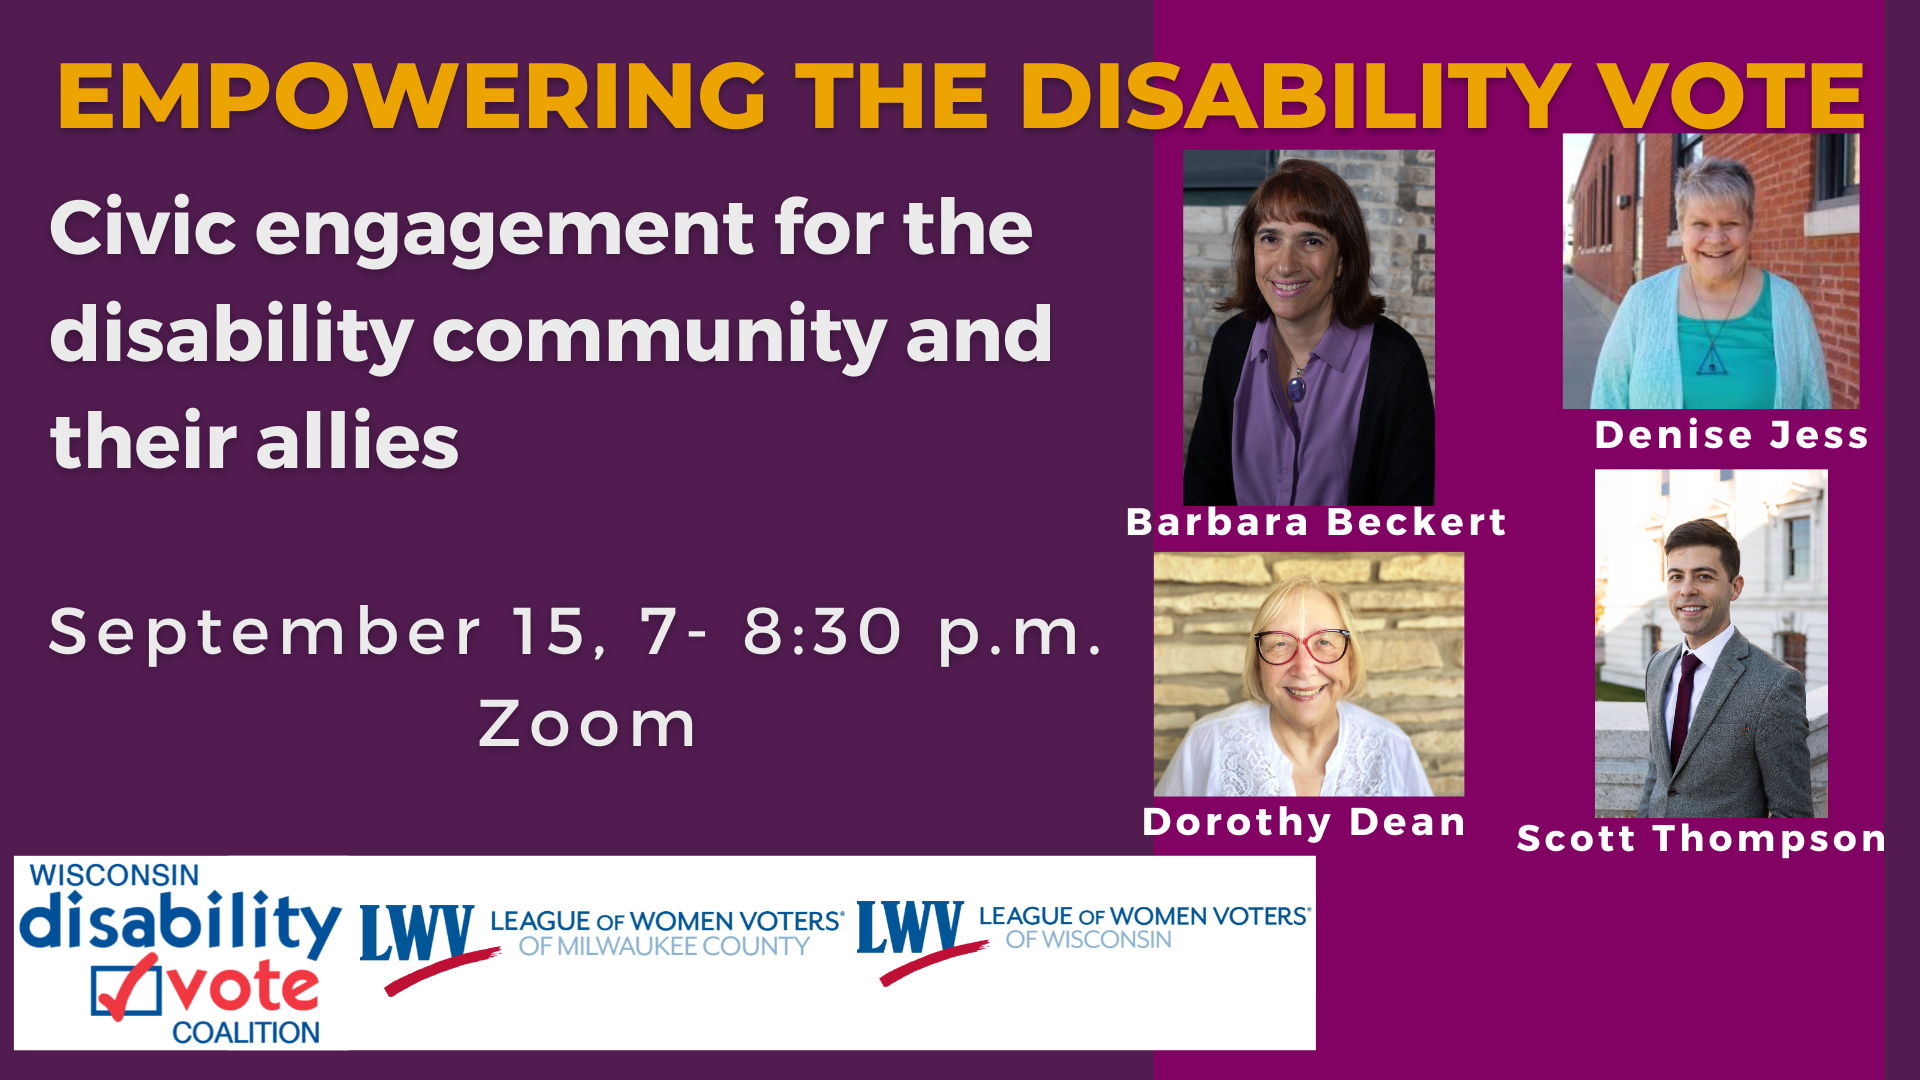 Event graphic for Empowering the Disability Vote with headshots of speakers: Barbara Beckert, Denise Jess, Dorothy Dean and Scott Thompson